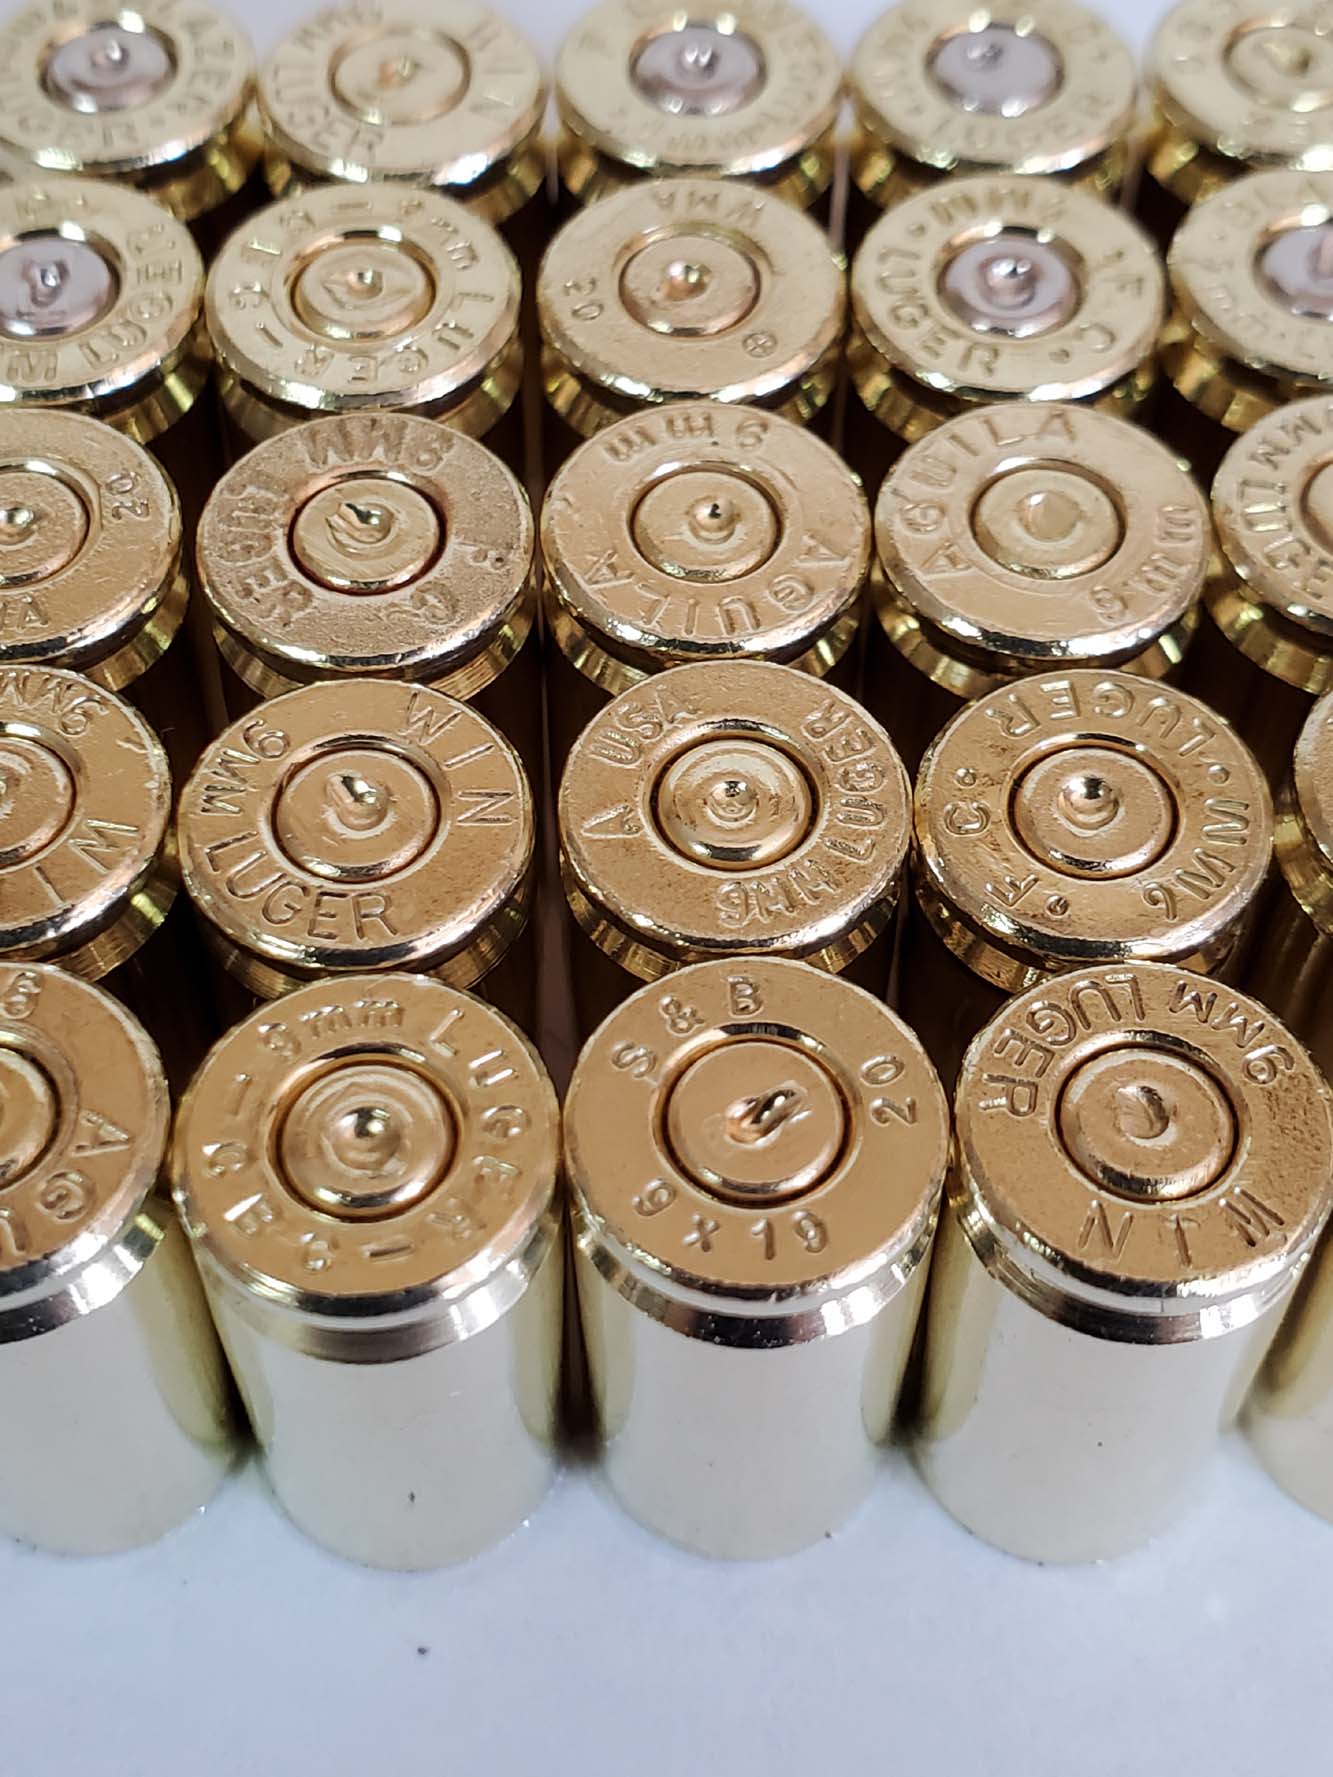 9MM Once Fired Brass Casings Mixed Head Stamps - Once Fired Brass